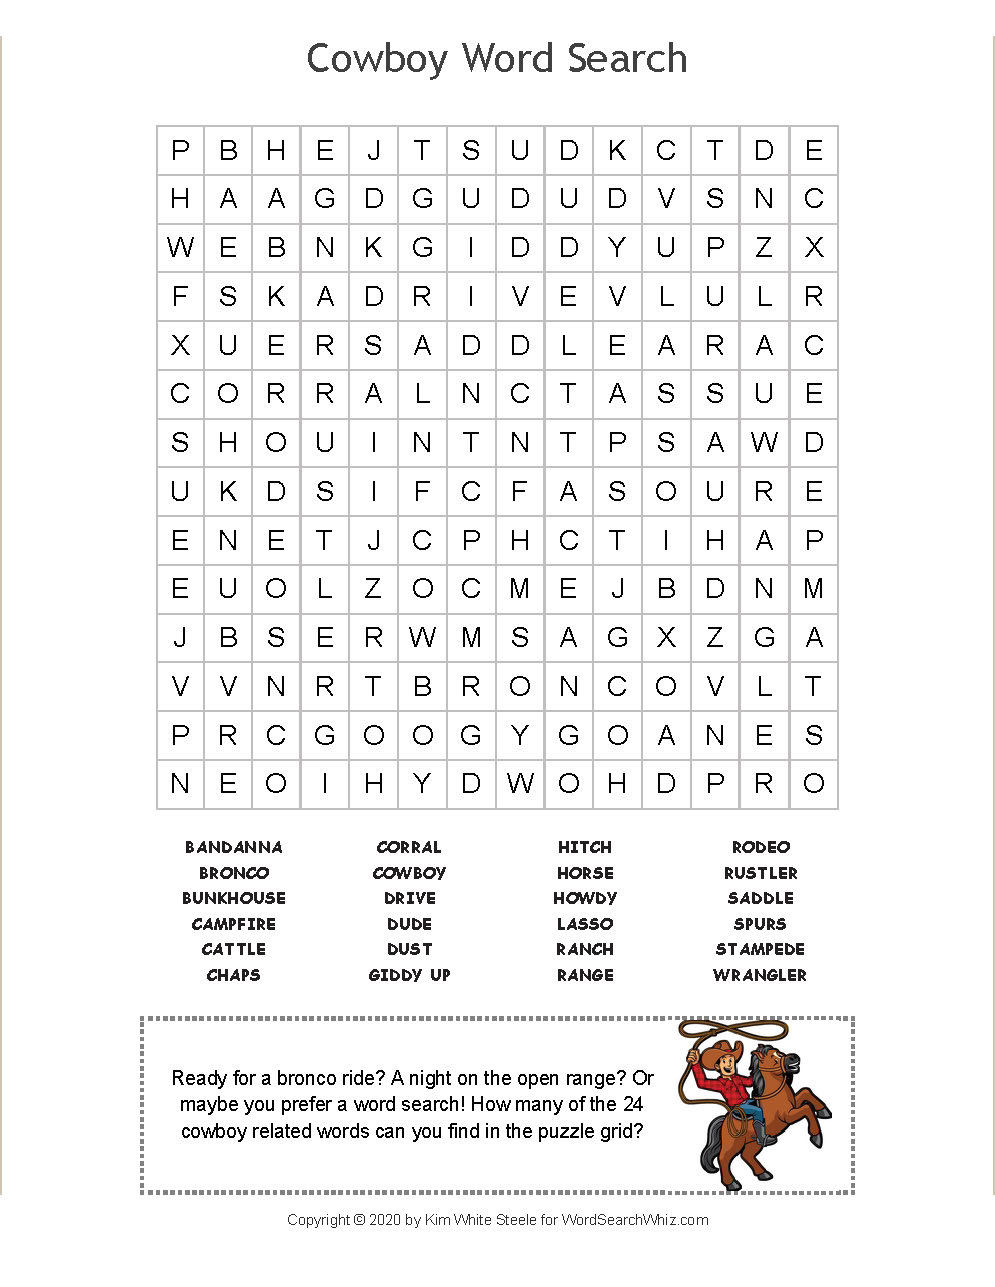 Ballet Terms Crossword Puzzle Printable